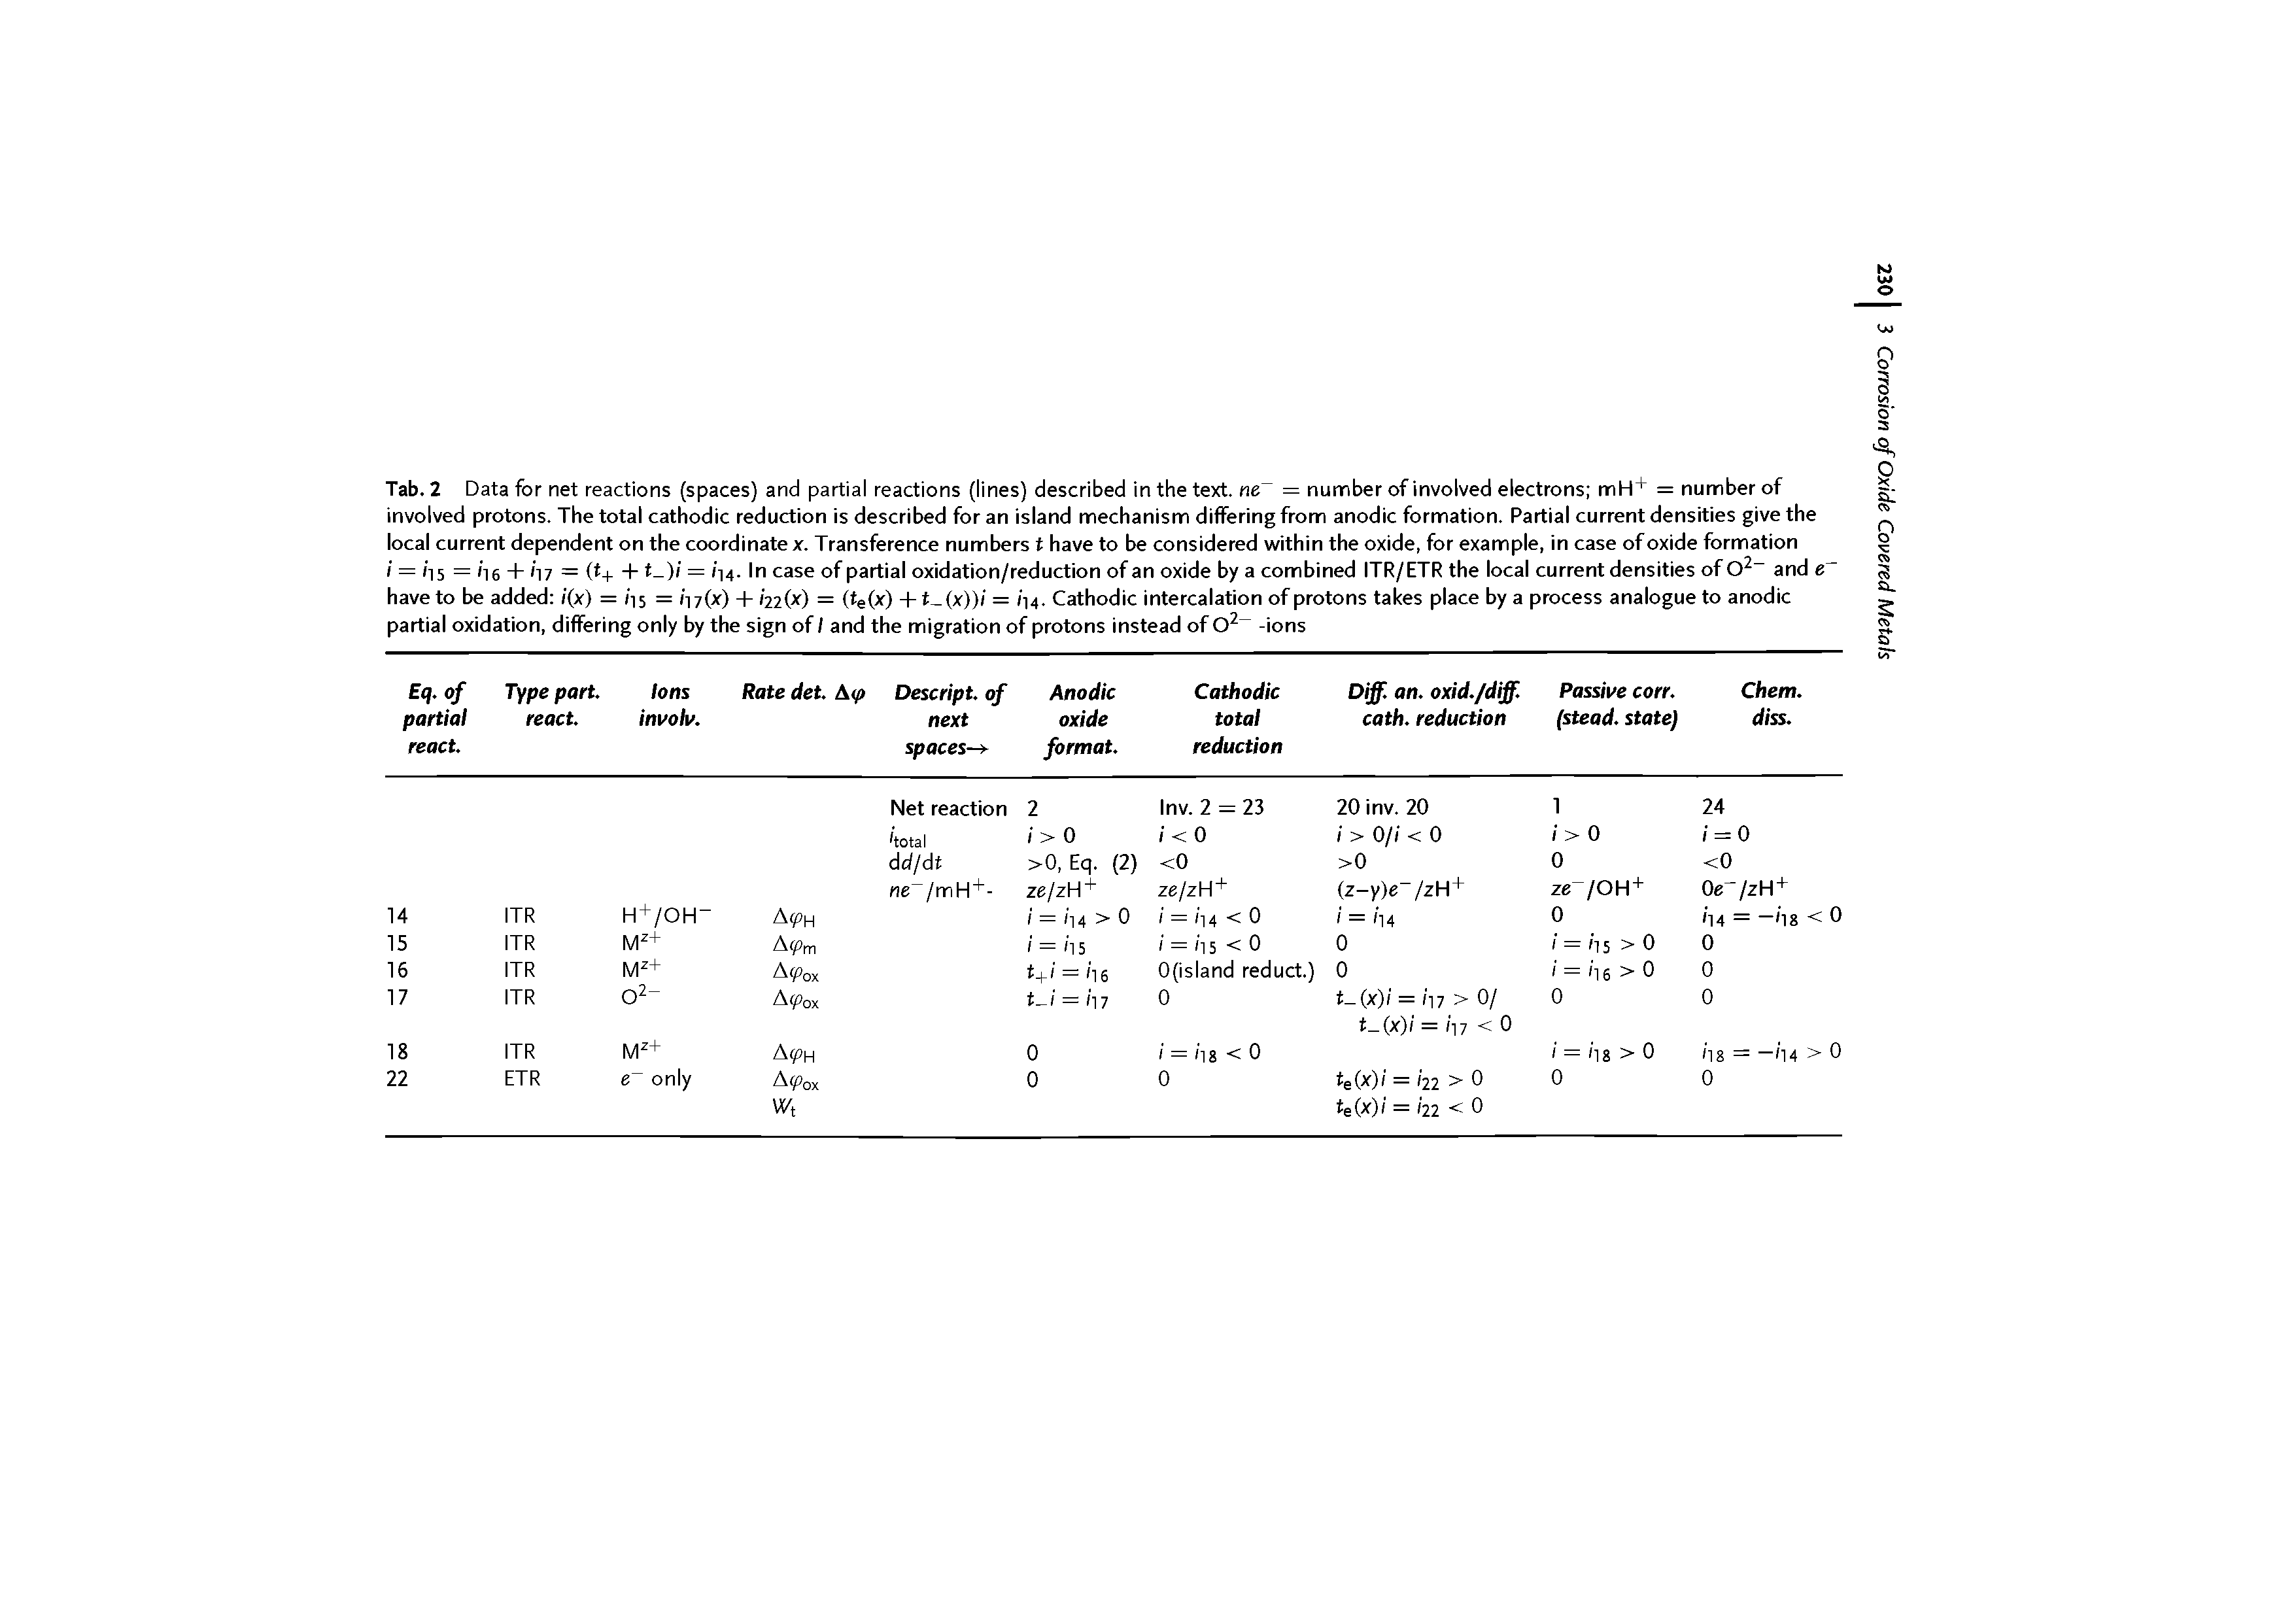 Tab. 2 Data for net reactions (spaces) and partial reactions (lines) described in the text, ne = number of involved electrons mH+ = number of involved protons. The total cathodic reduction is described for an island mechanism differing from anodic formation. Partial current densities give the local current dependent on the coordinate x. Transference numbers t have to be considered within the oxide, for example, in case of oxide formation i = /i5 = /i6 + (17 = (f+ + t )i = i i4. In case of partial oxidation/reduction of an oxide by a combined ITR/ETR the local current densities of and have to be added i(x) = / is = ii7(x) + inM = ( e(x) + t-(x))/ = /14. Cathodic intercalation of protons takes place by a process analogue to anodic partial oxidation, differing only by the sign of / and the migration of protons instead of -ions...